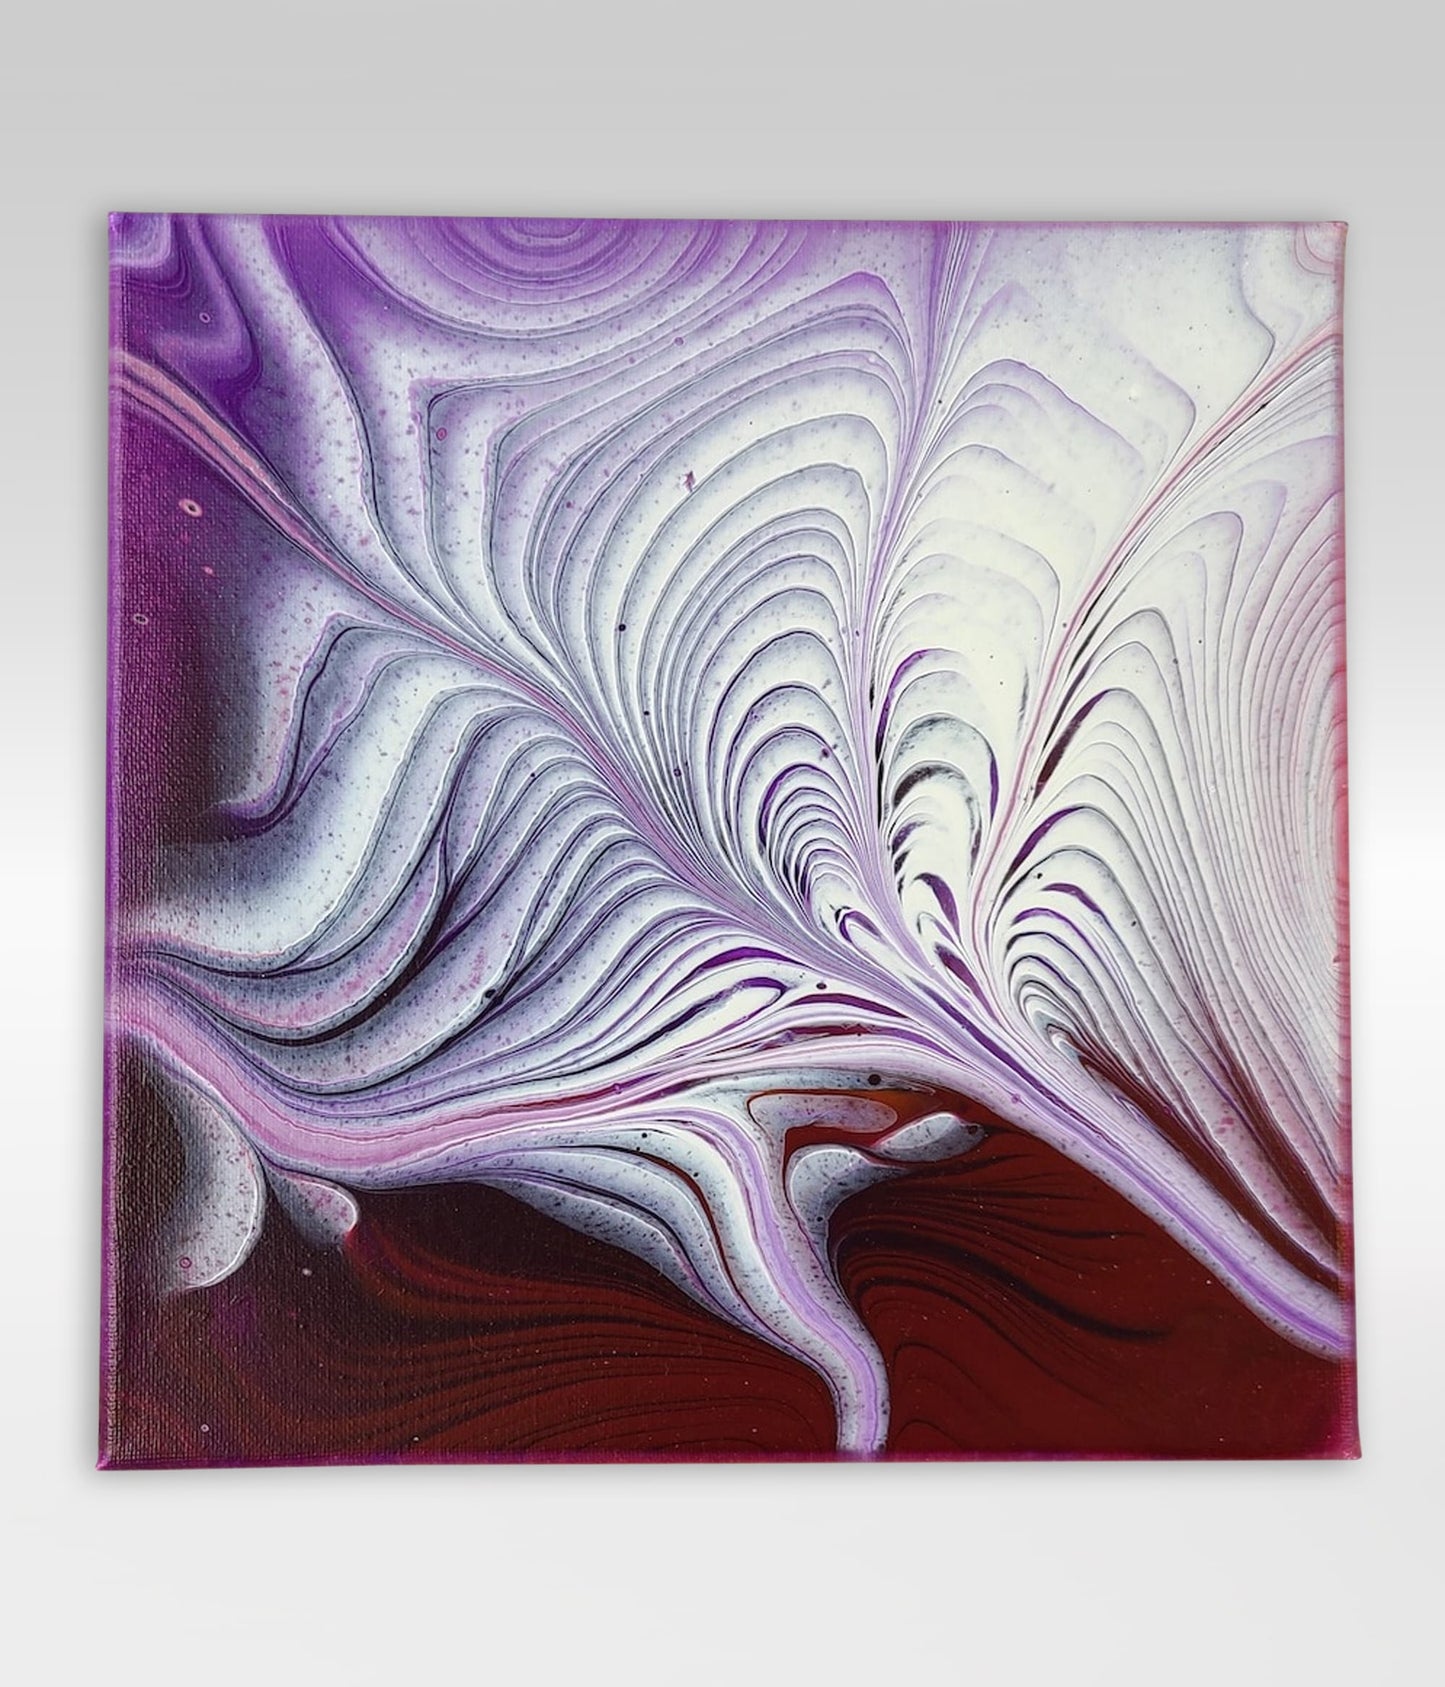 Web Foot – 10 x 10 Acrylic Pour Painting On Canvas